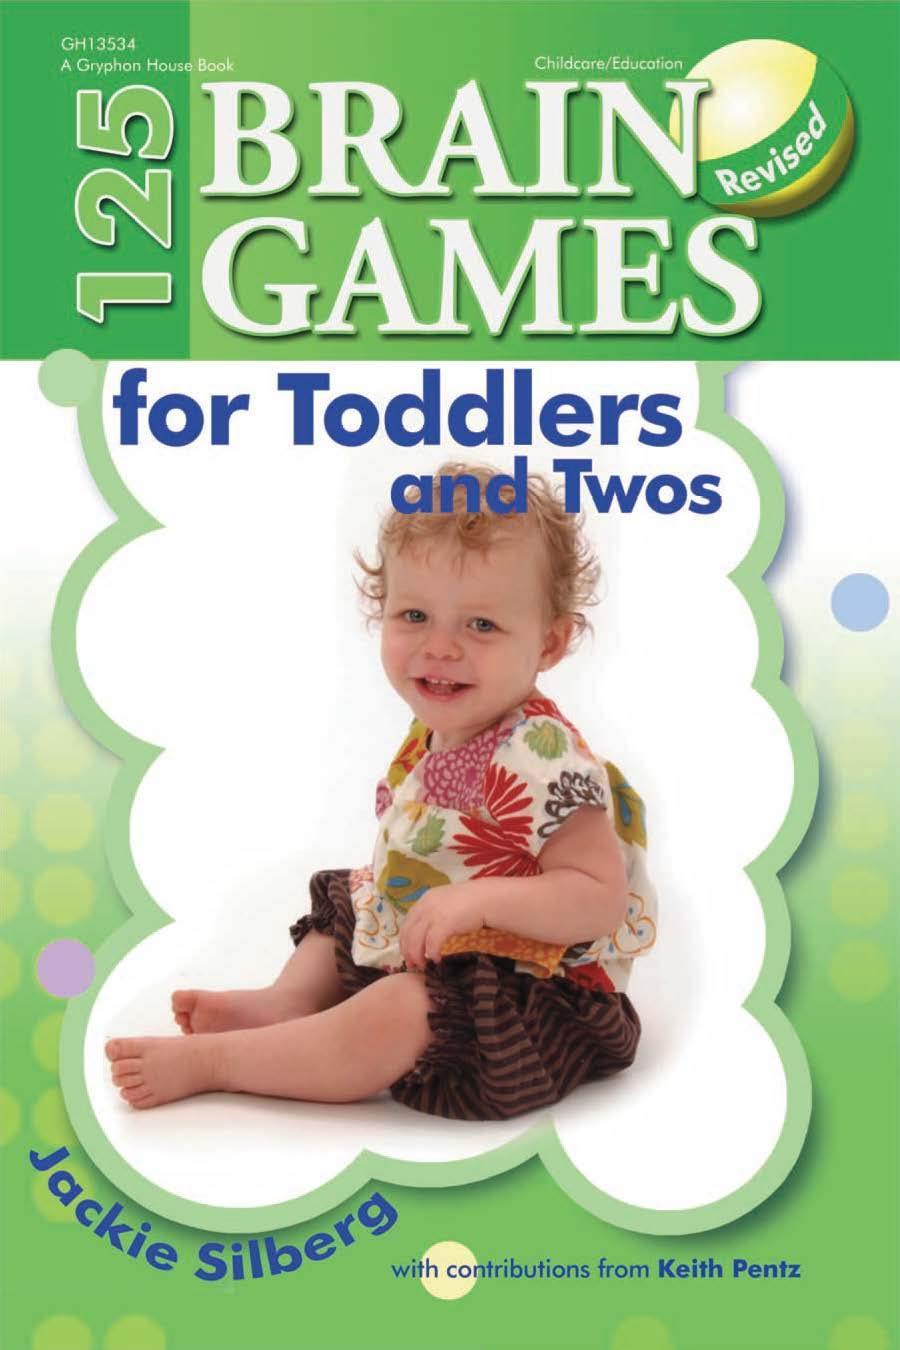 125 Brain Games for Toddlers and Twos